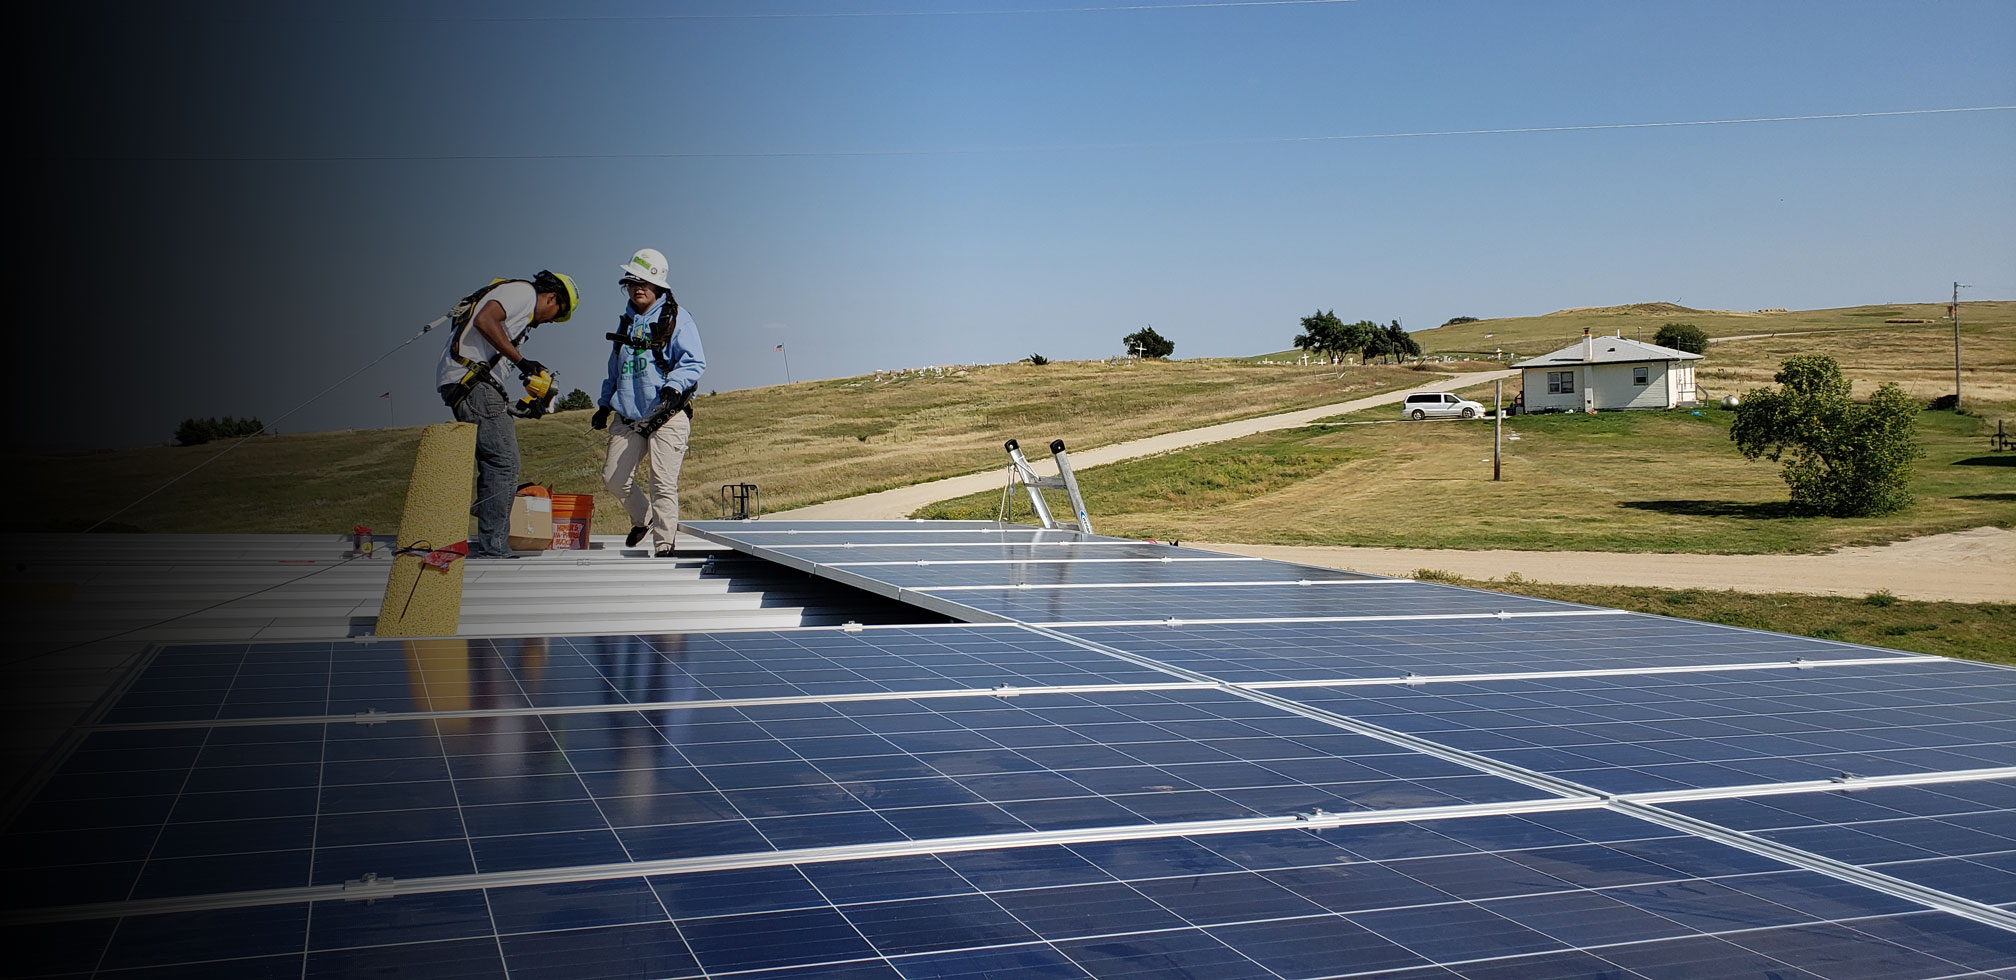 two men in hard hats and safety harnesses, working on a flat roofed building in the middle of rolling hills, installing solar panels. dirt road, a few trees and blue sky in the background.